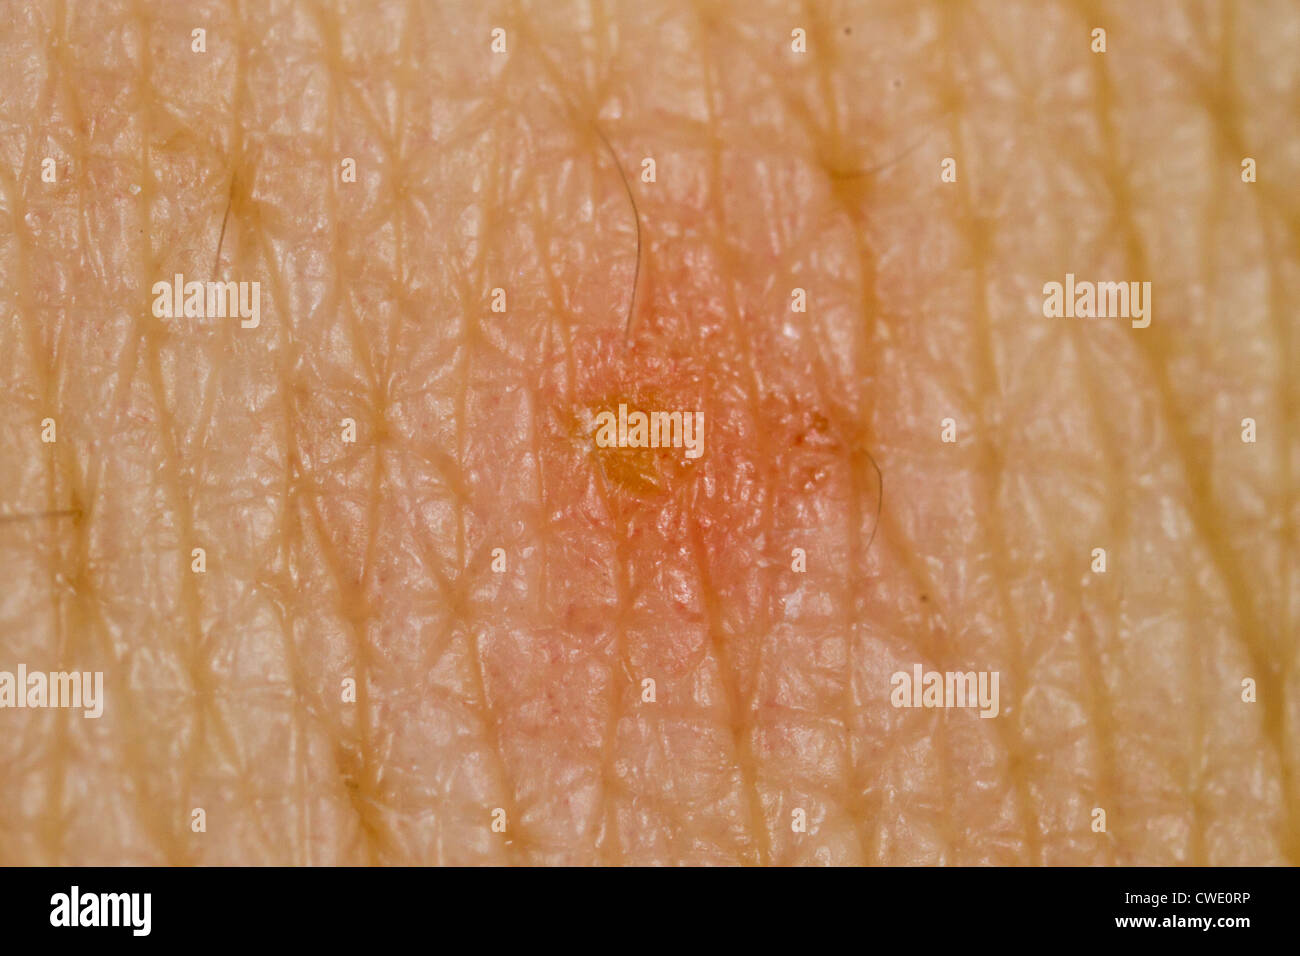 Scabies infected skin, close-up. Stock Photo